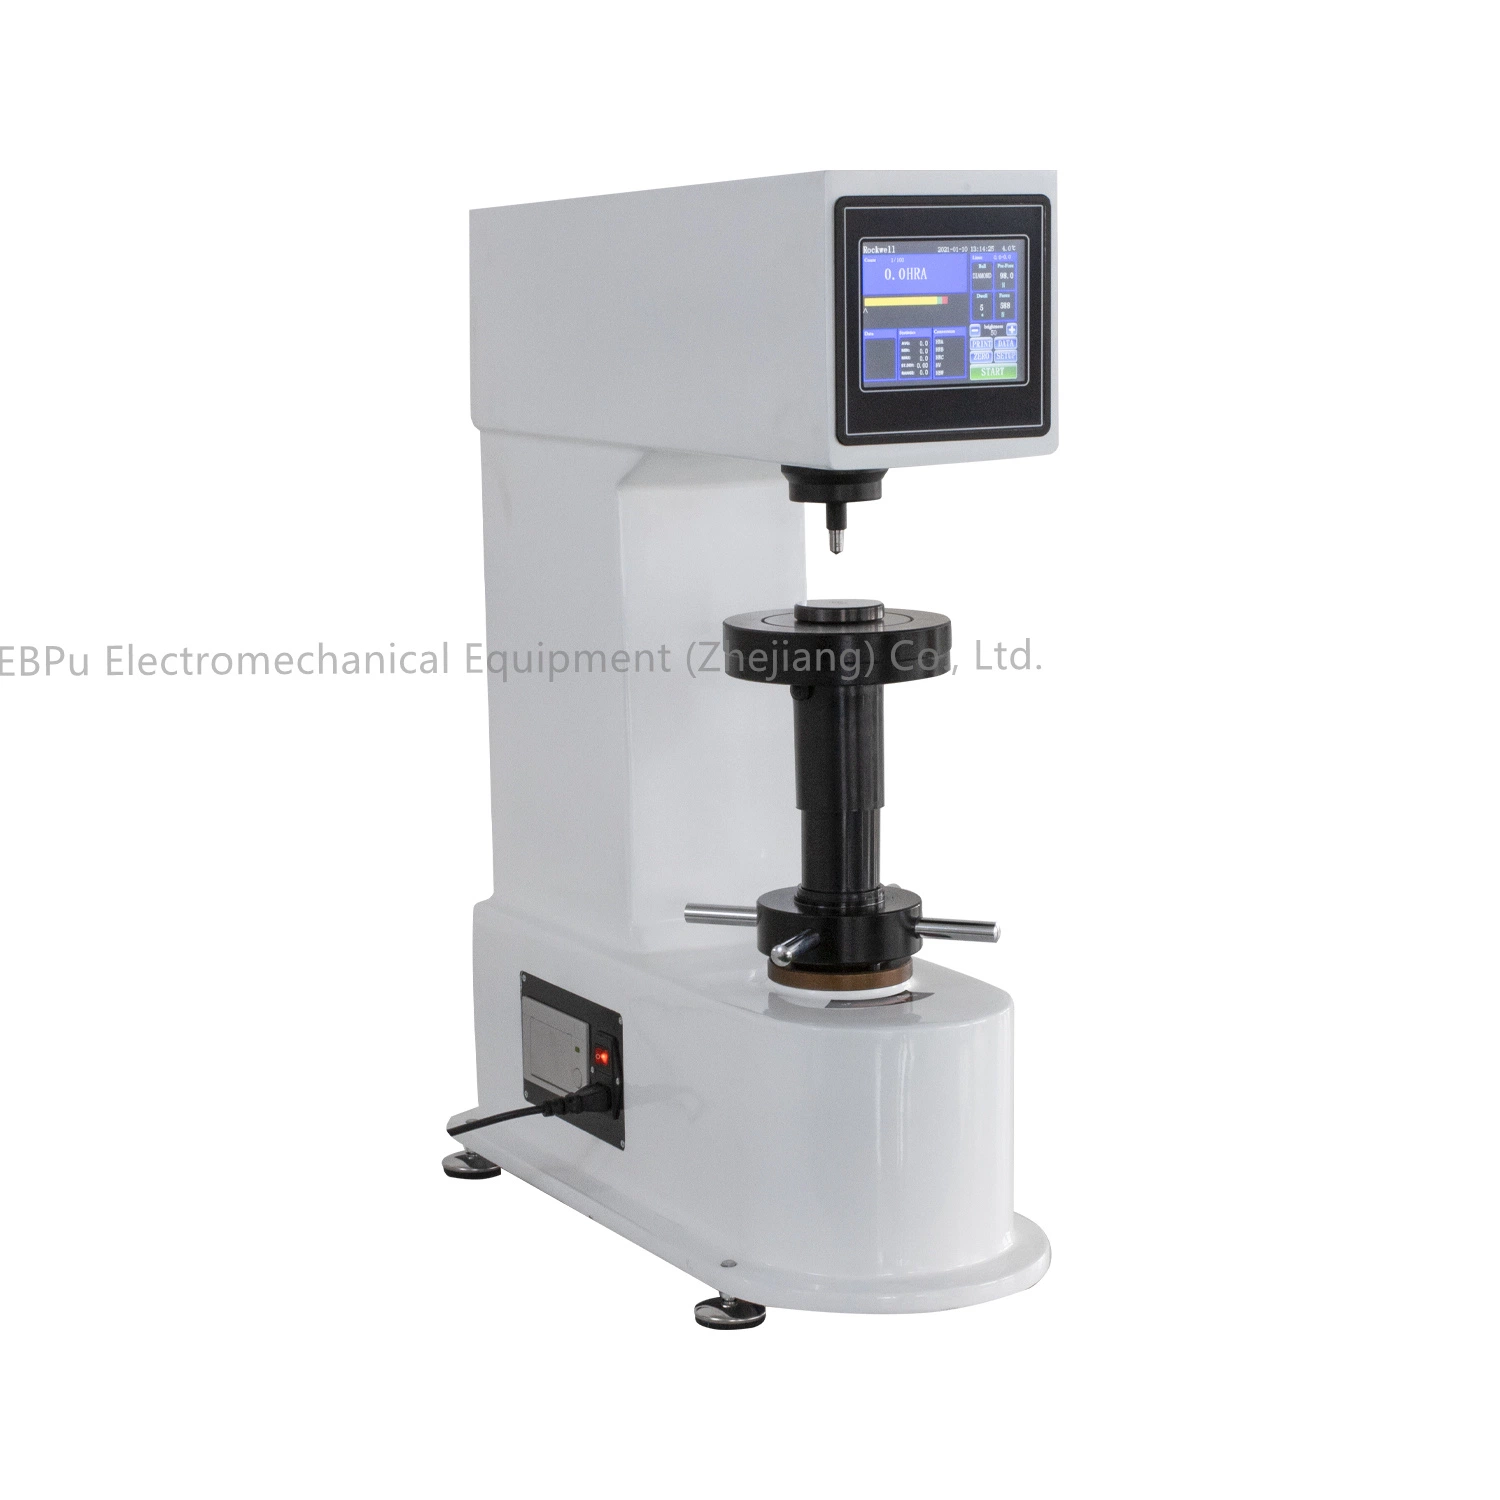 Accurate Test Data Automatic Display on Touch Screen Hardness Testing Equipment